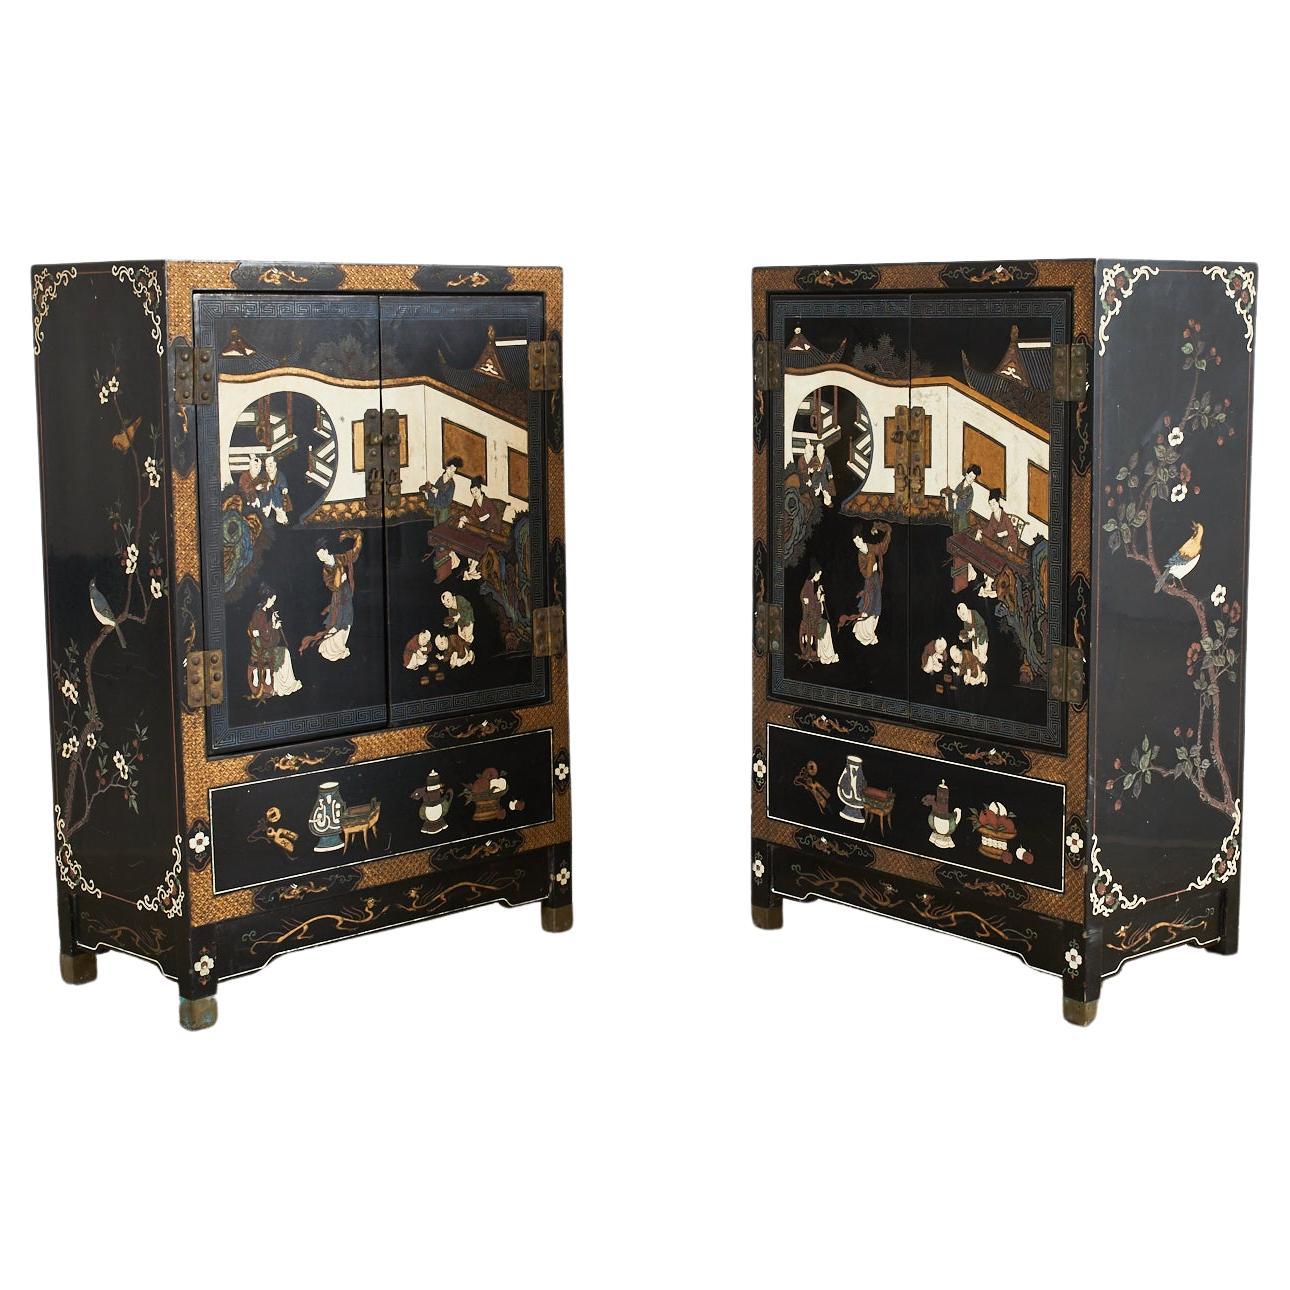 Pair of Chinese Export Coromandel Style Lacquered Cabinets